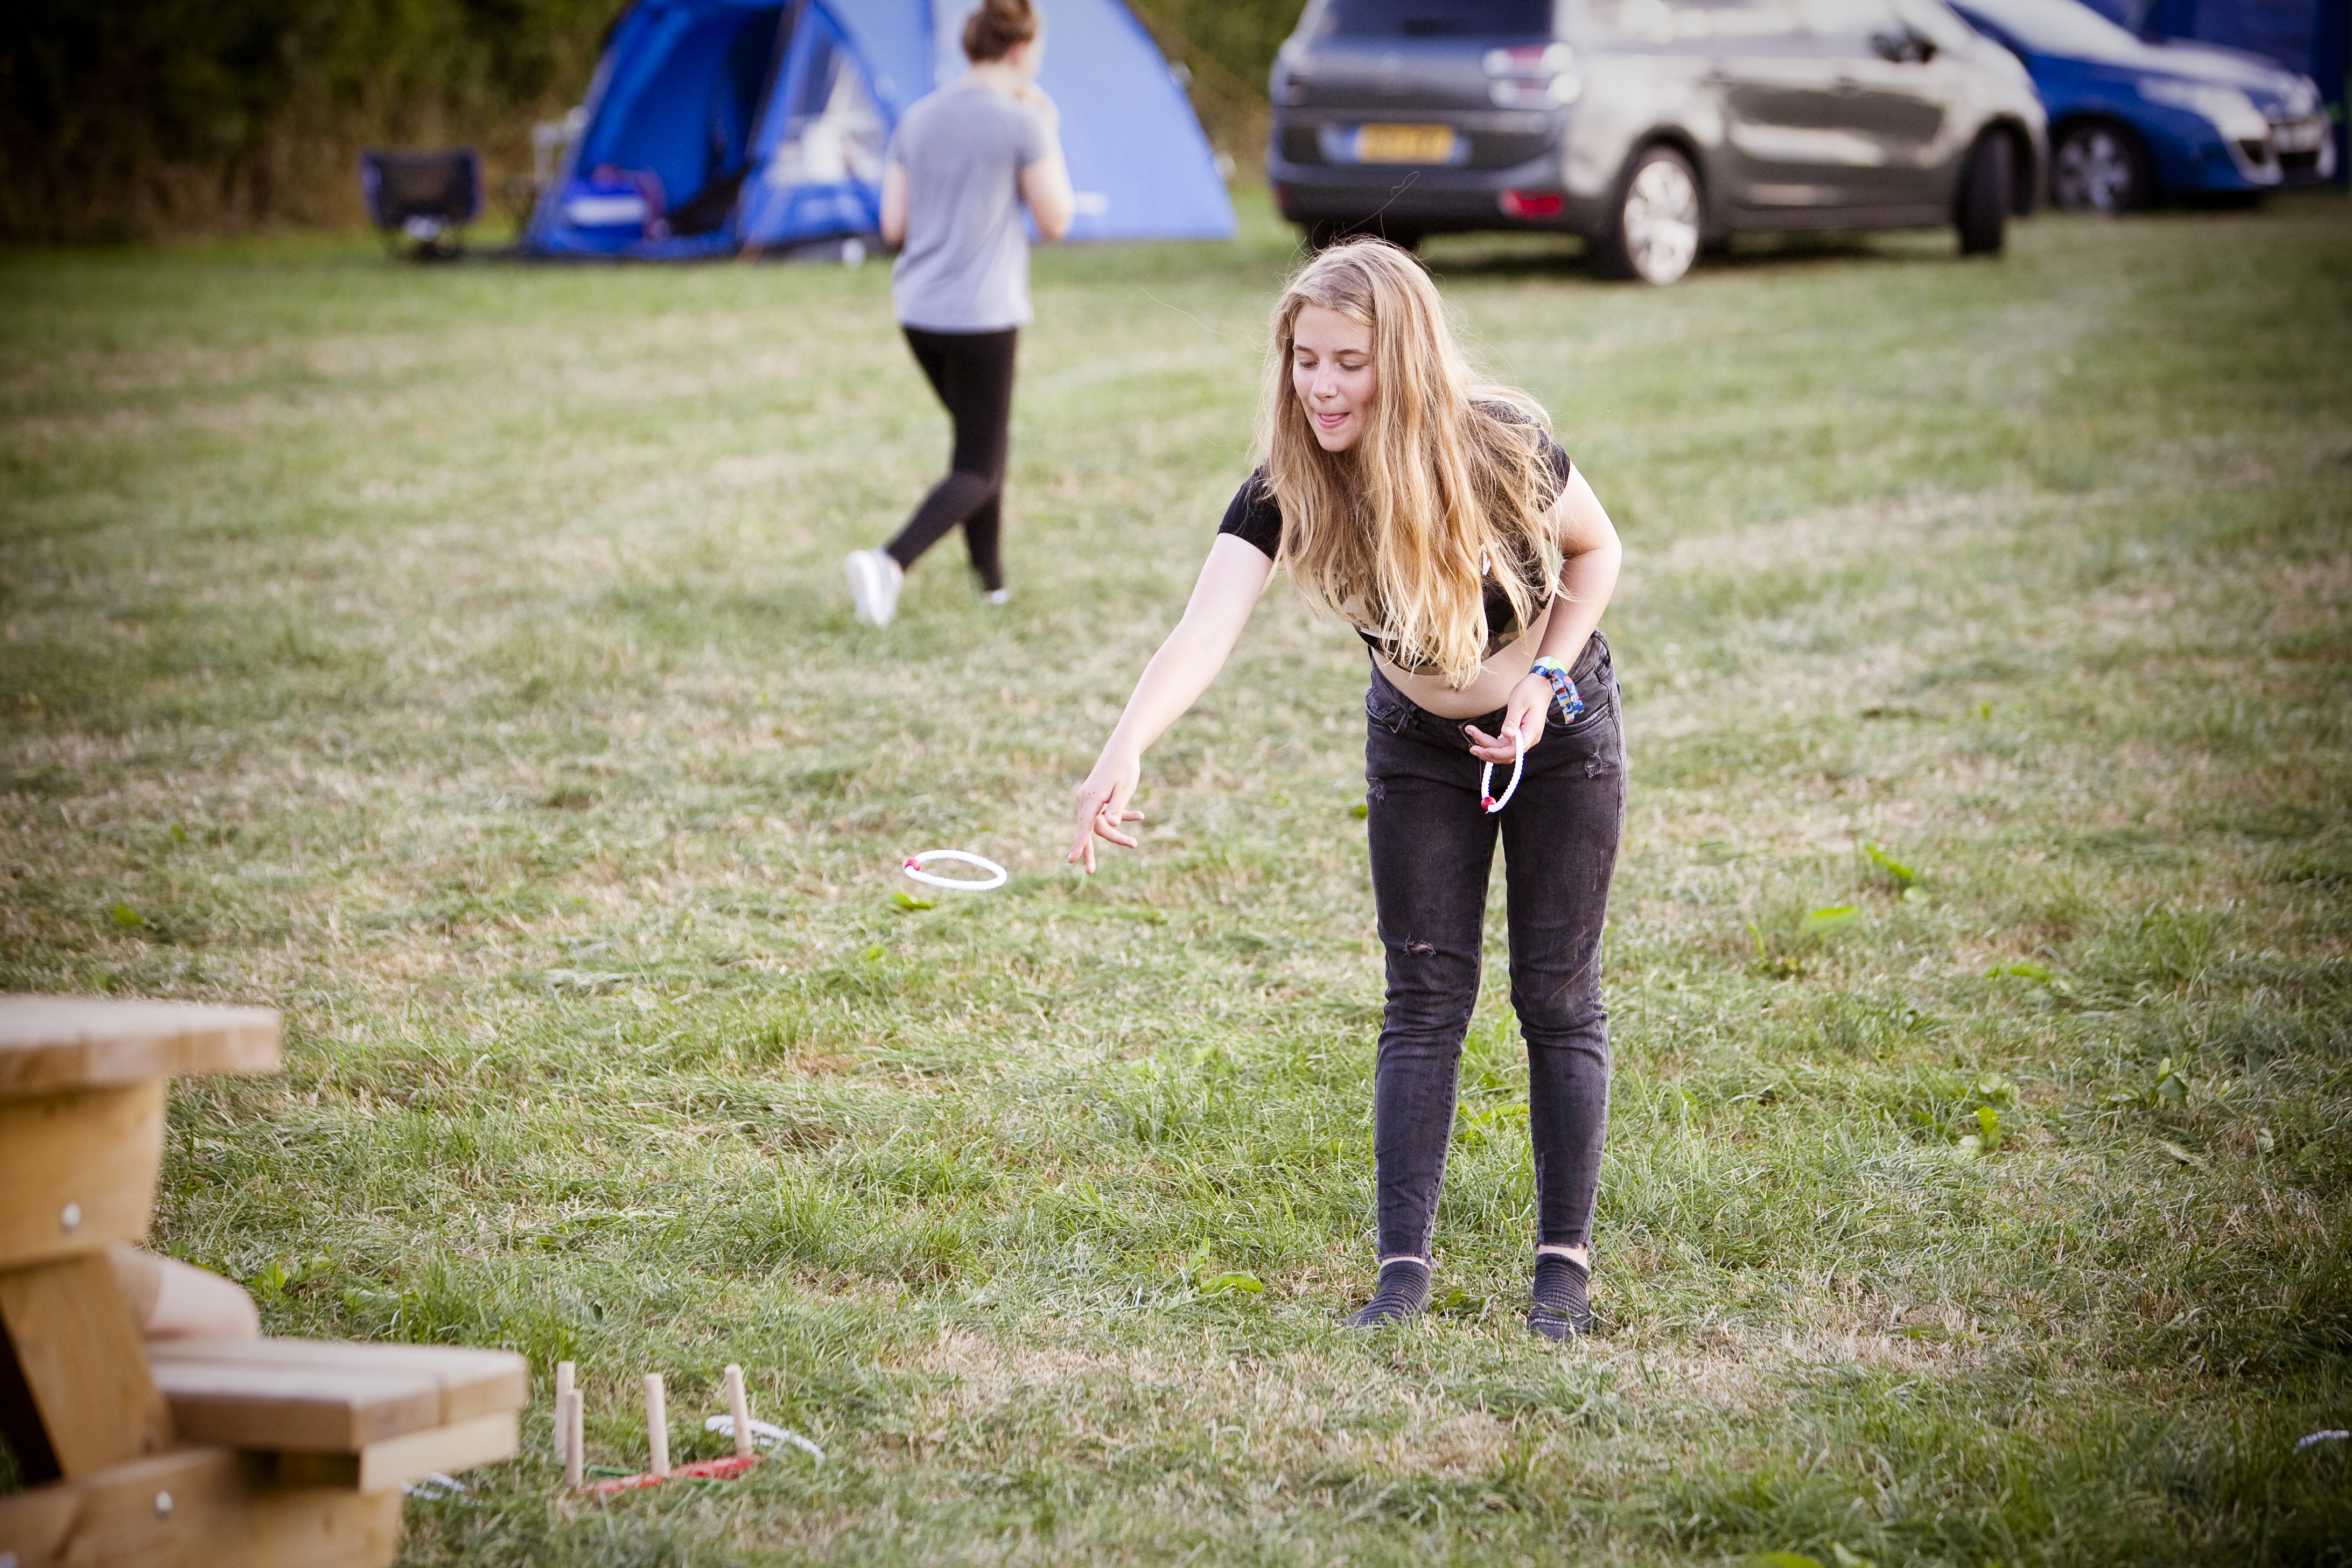 Pitch and Canvas | Glamping and Camping in Cheshire | Girl Playing